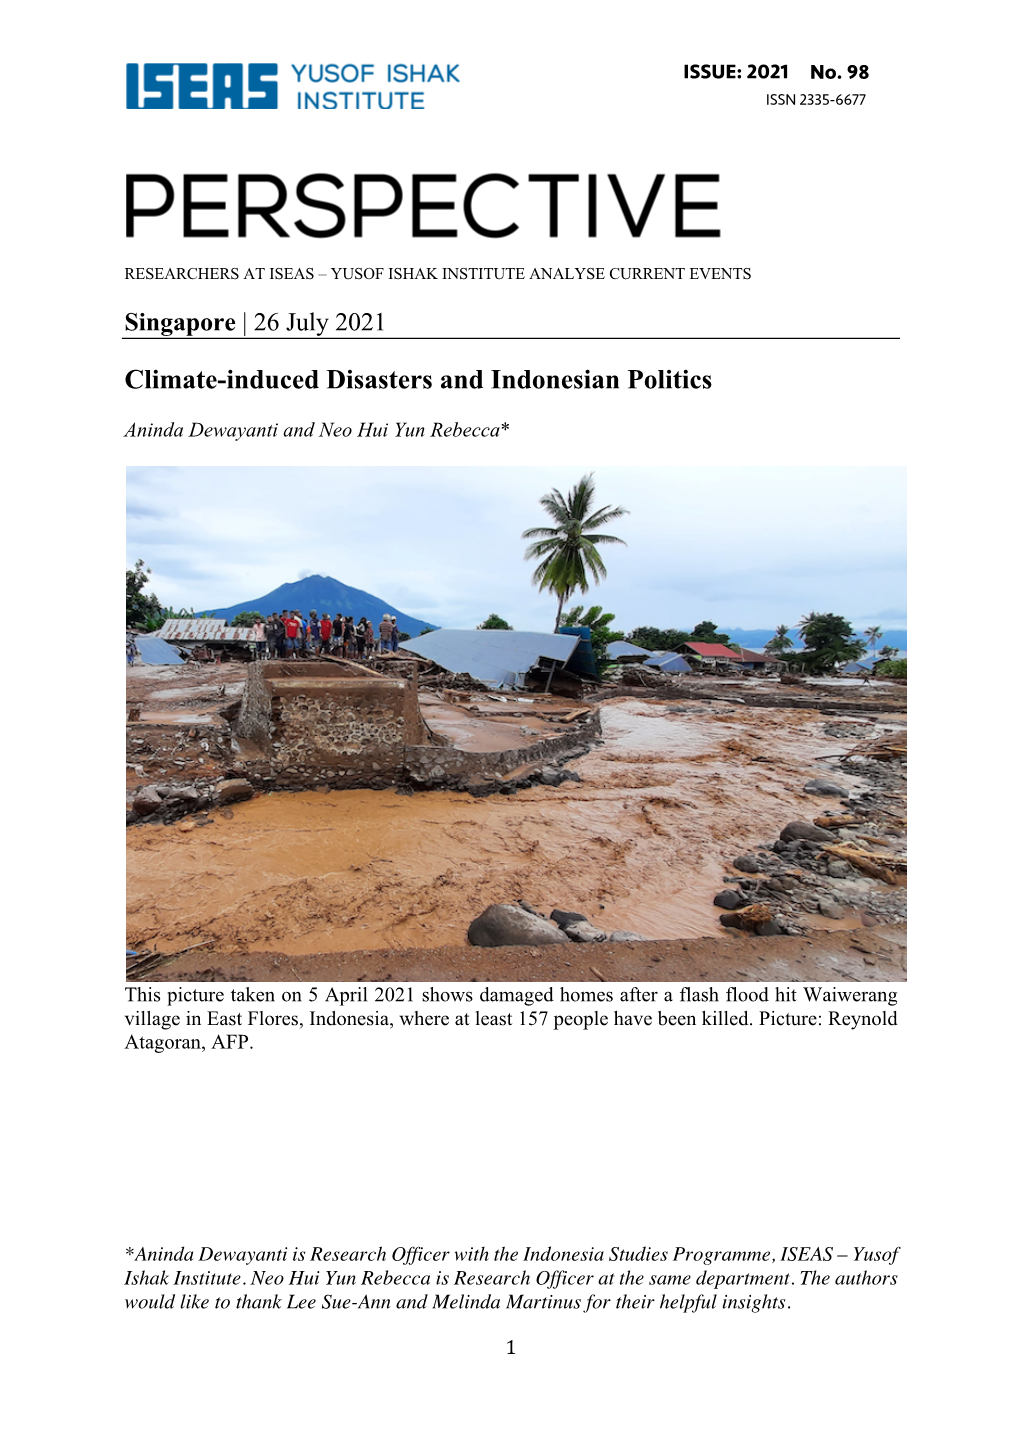 Climate-Induced Disasters and Indonesian Politics